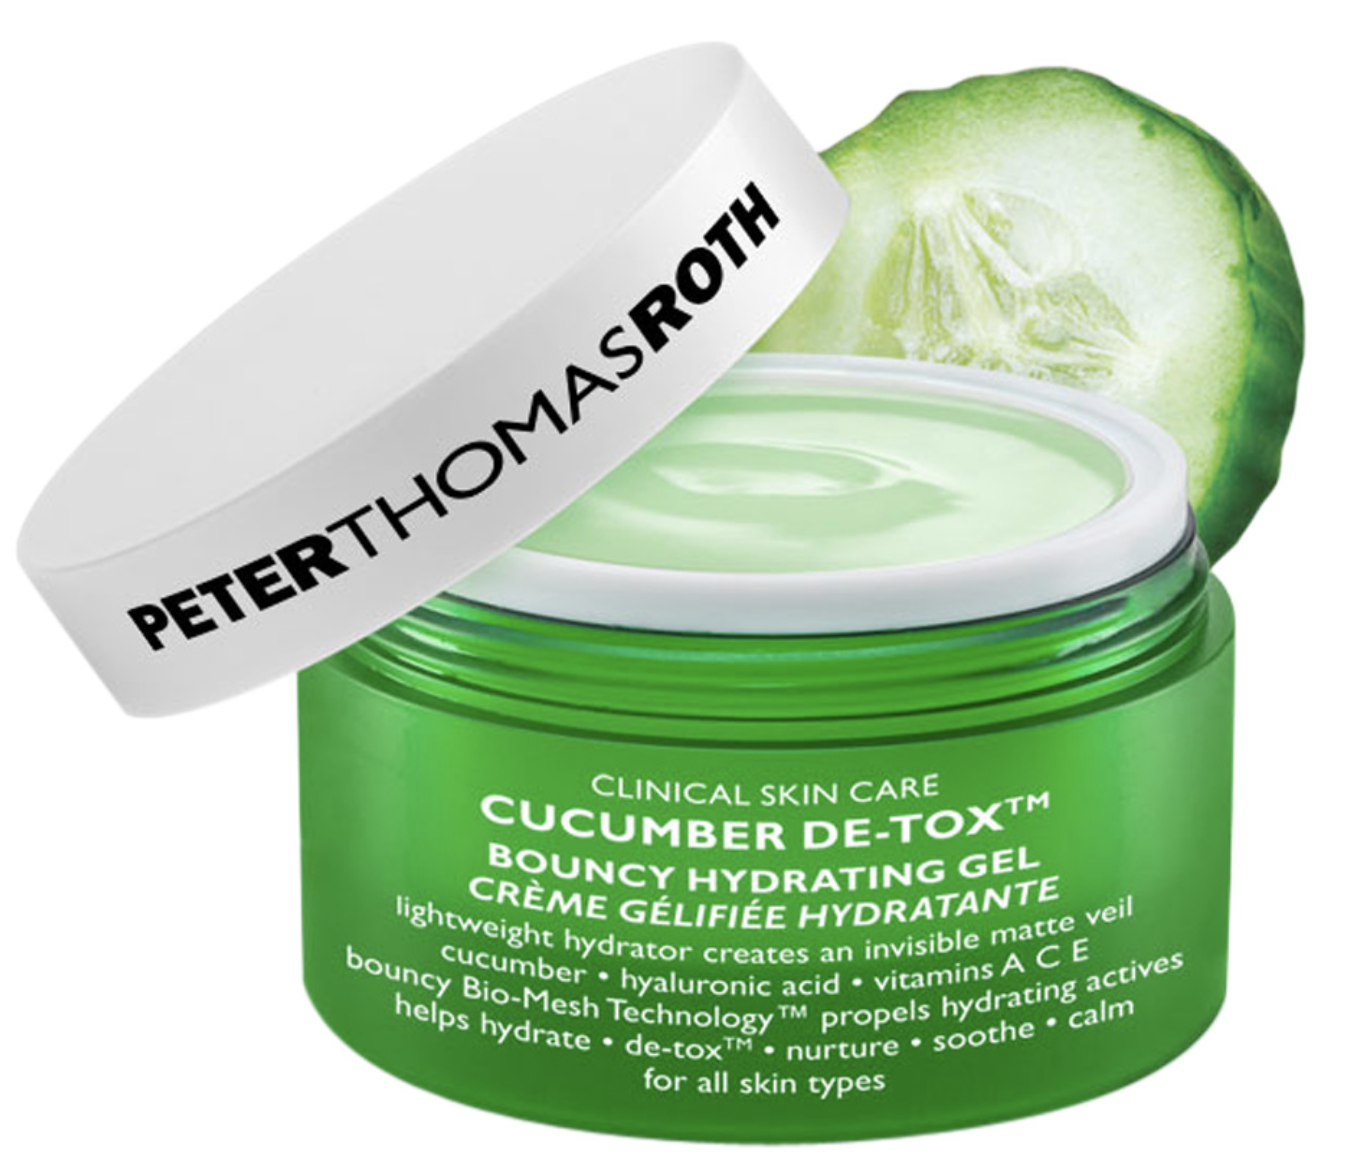 Peter Thomas Roth Cucumber De-Tox Bouncy Hydrating Ge